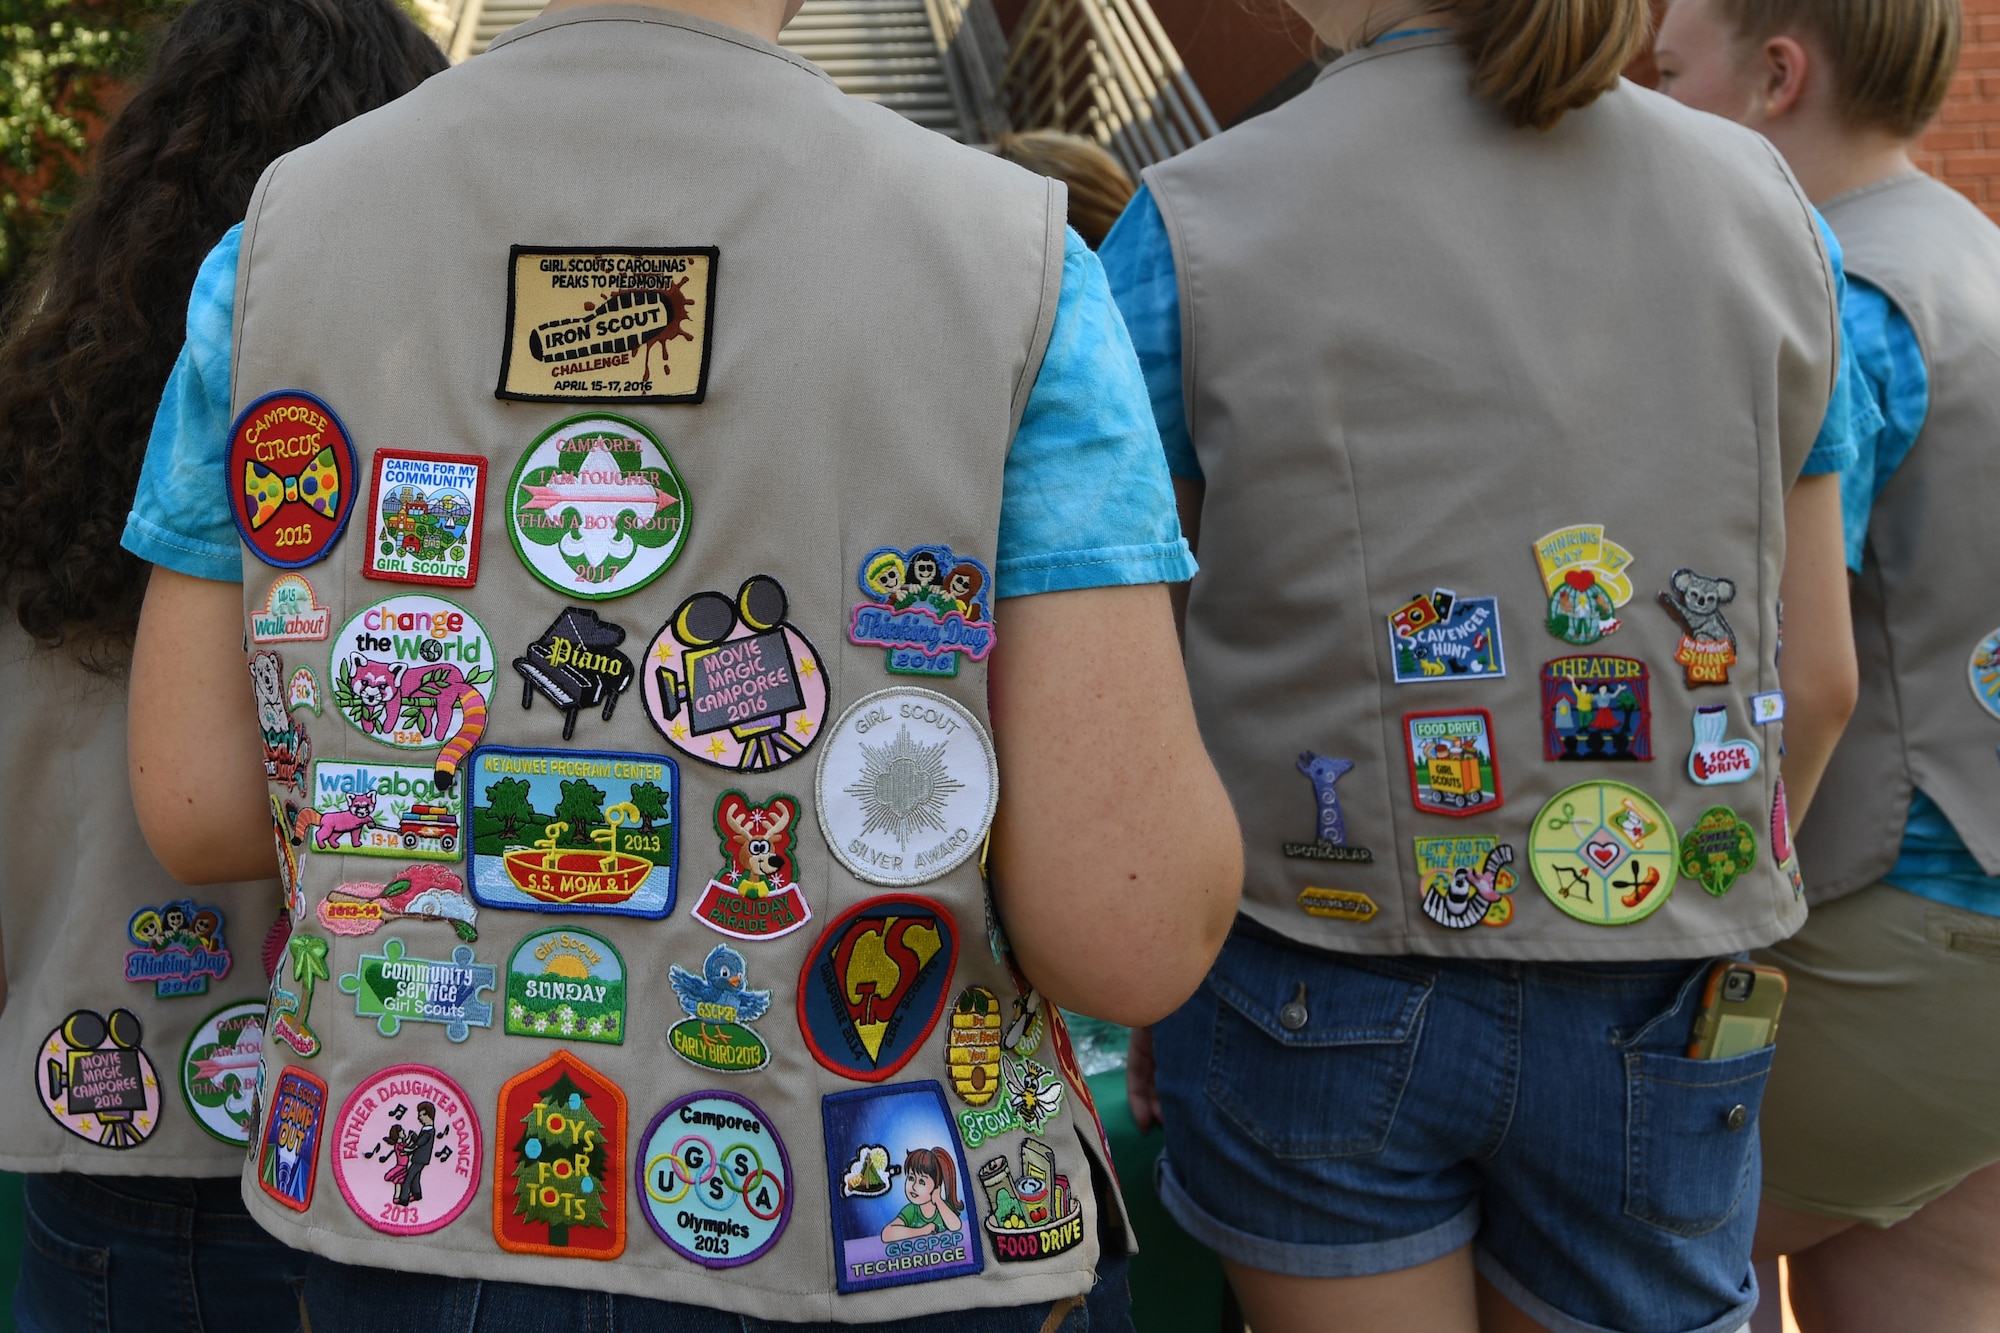 Girl Scouts from Troop 20436 of Denver, N.C., will earn a “Service to Others” patch for volunteering to hand out cookies at the North Carolina Air National Guard Base, Charlotte Douglas International Airport, June 9, 2018. Seven Girl Scouts showed appreciation for the military members as they handed out 600 boxes of cookies to Airmen during their fifth annual visit at the base.